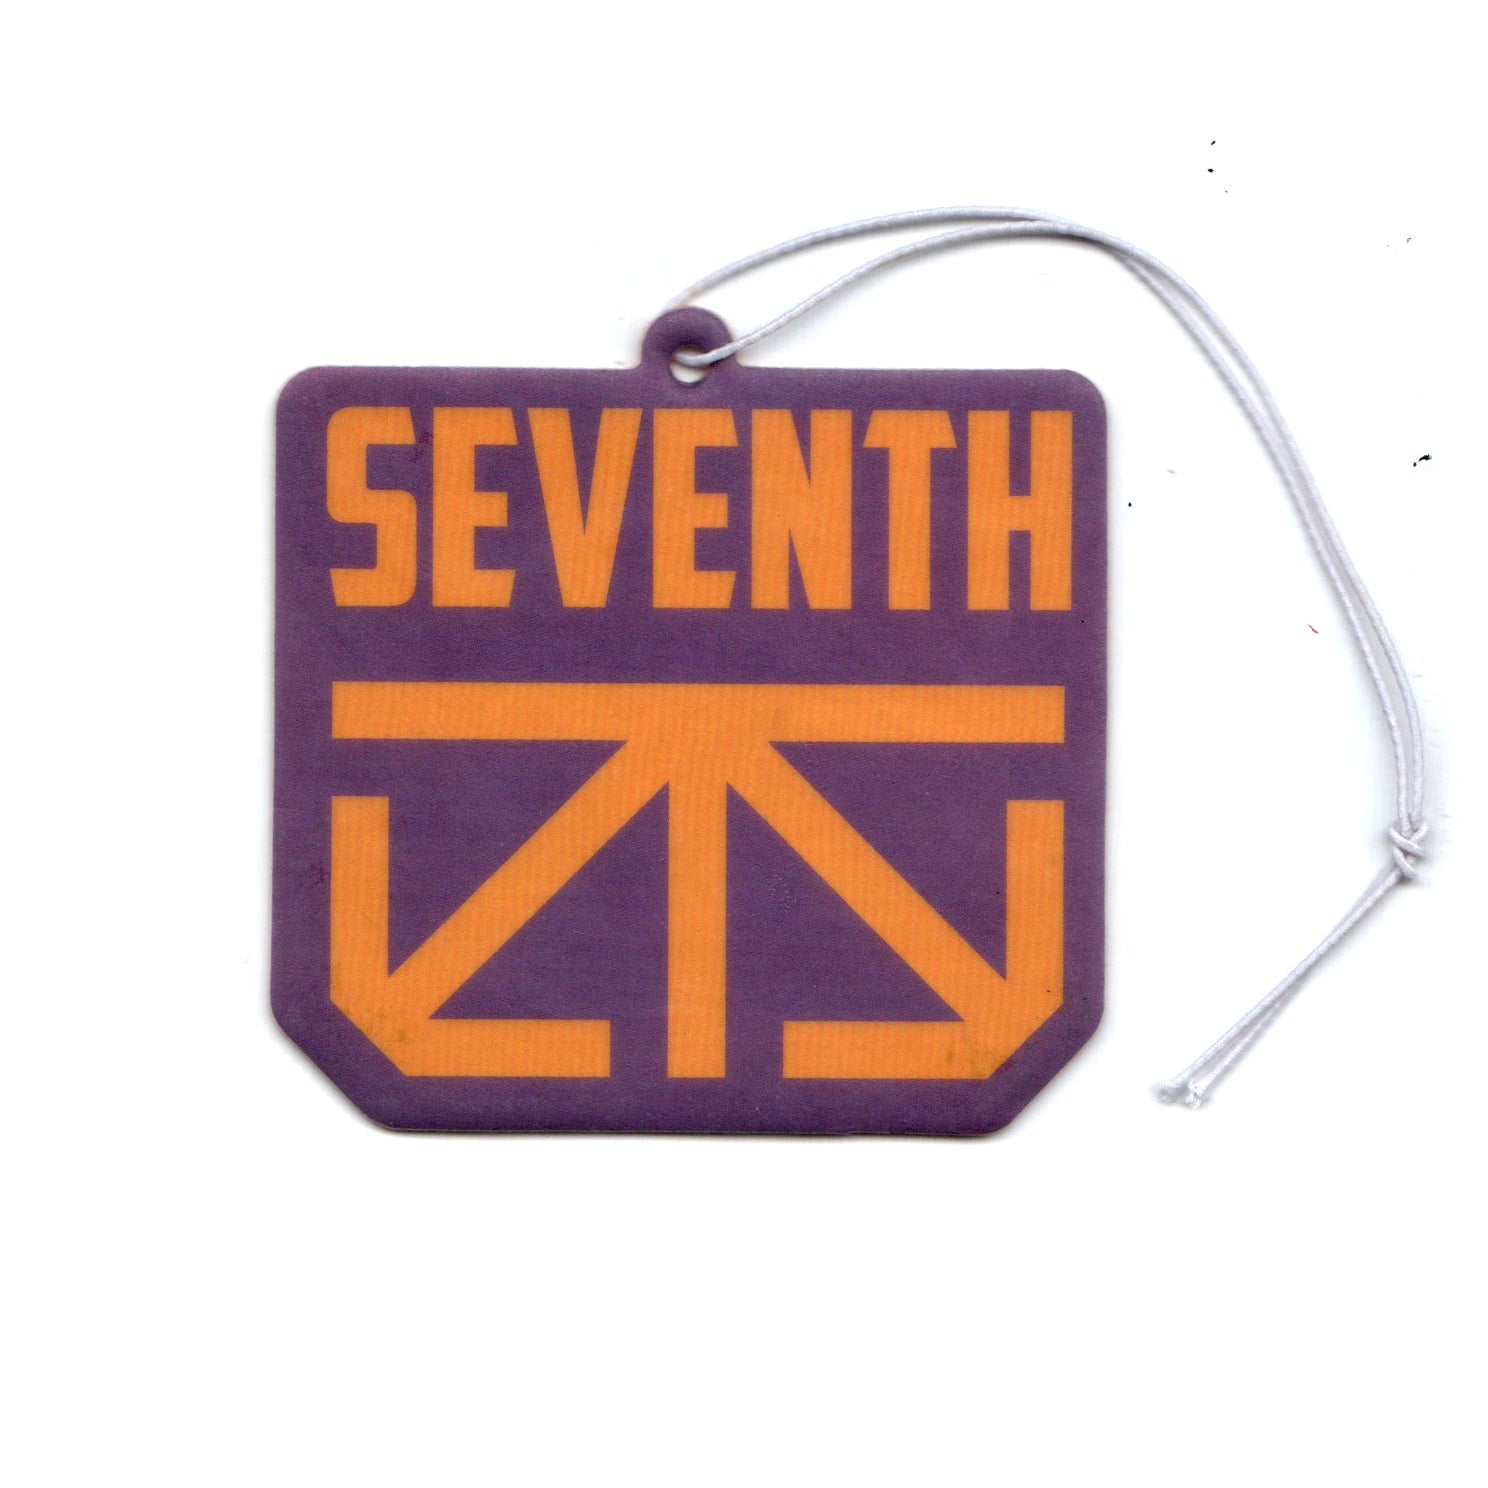 THE SEVENTH LETTER - SEVENTH